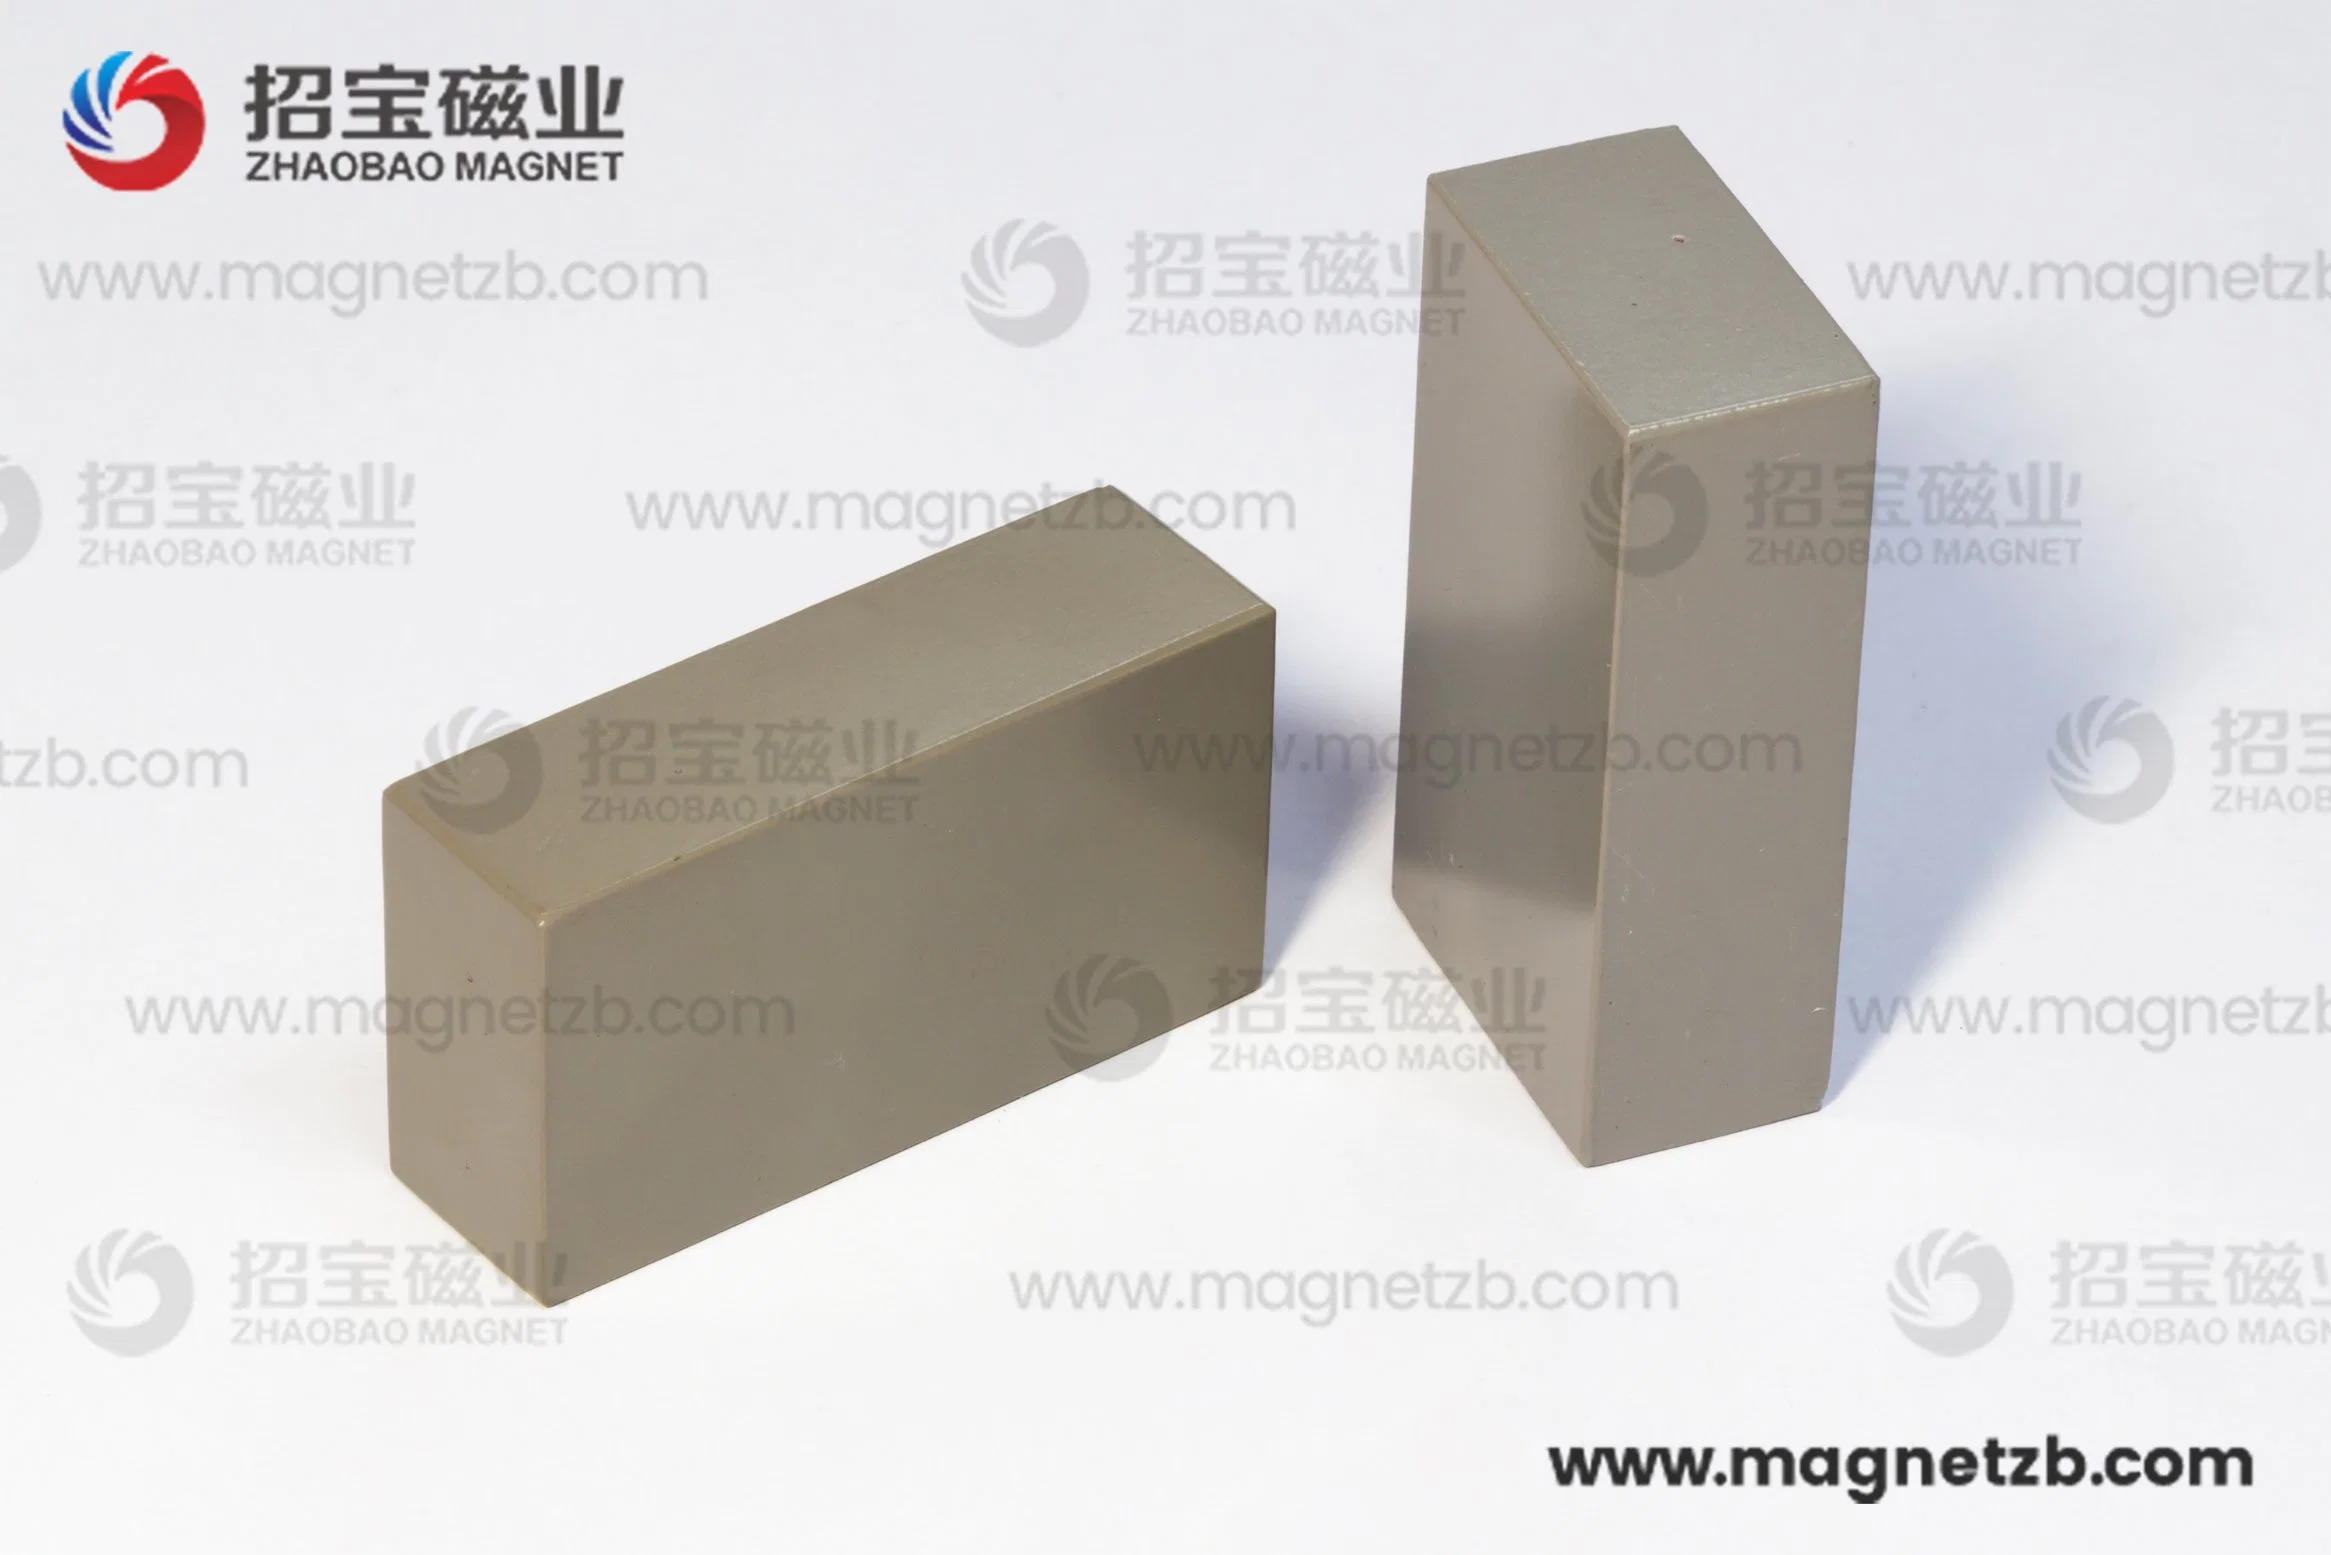 Rare Earth Permanent Manufacturer Strong Magnetic Material Customized Sintered Neodimio Neodymium NdFeB Zhaobao Block Grooved Magnet for Wind Turbines